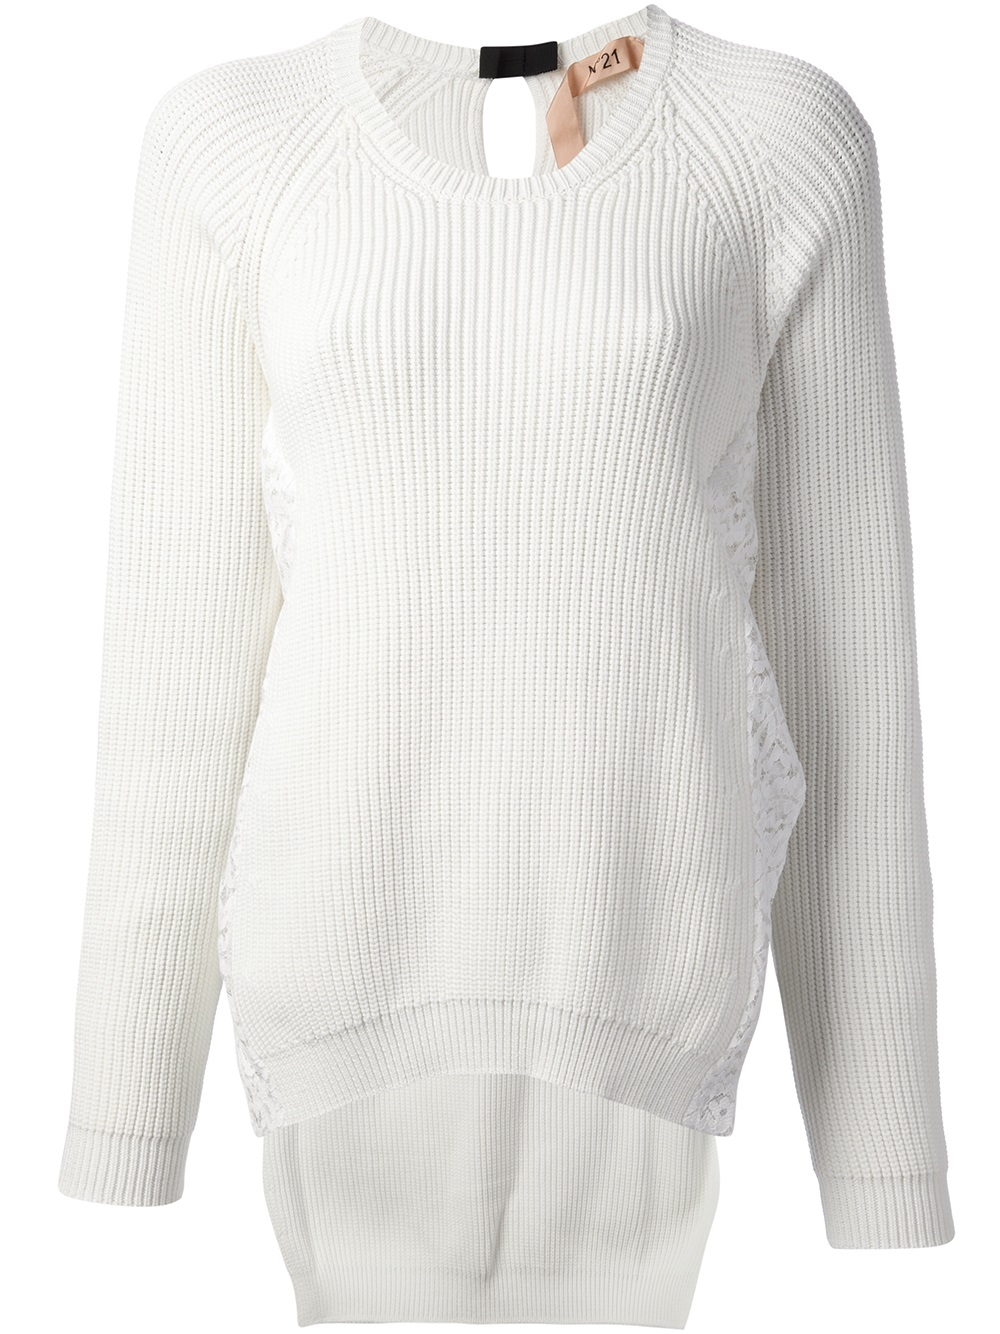 N°21 Long Ribbed Knit Jumper in White - Lyst